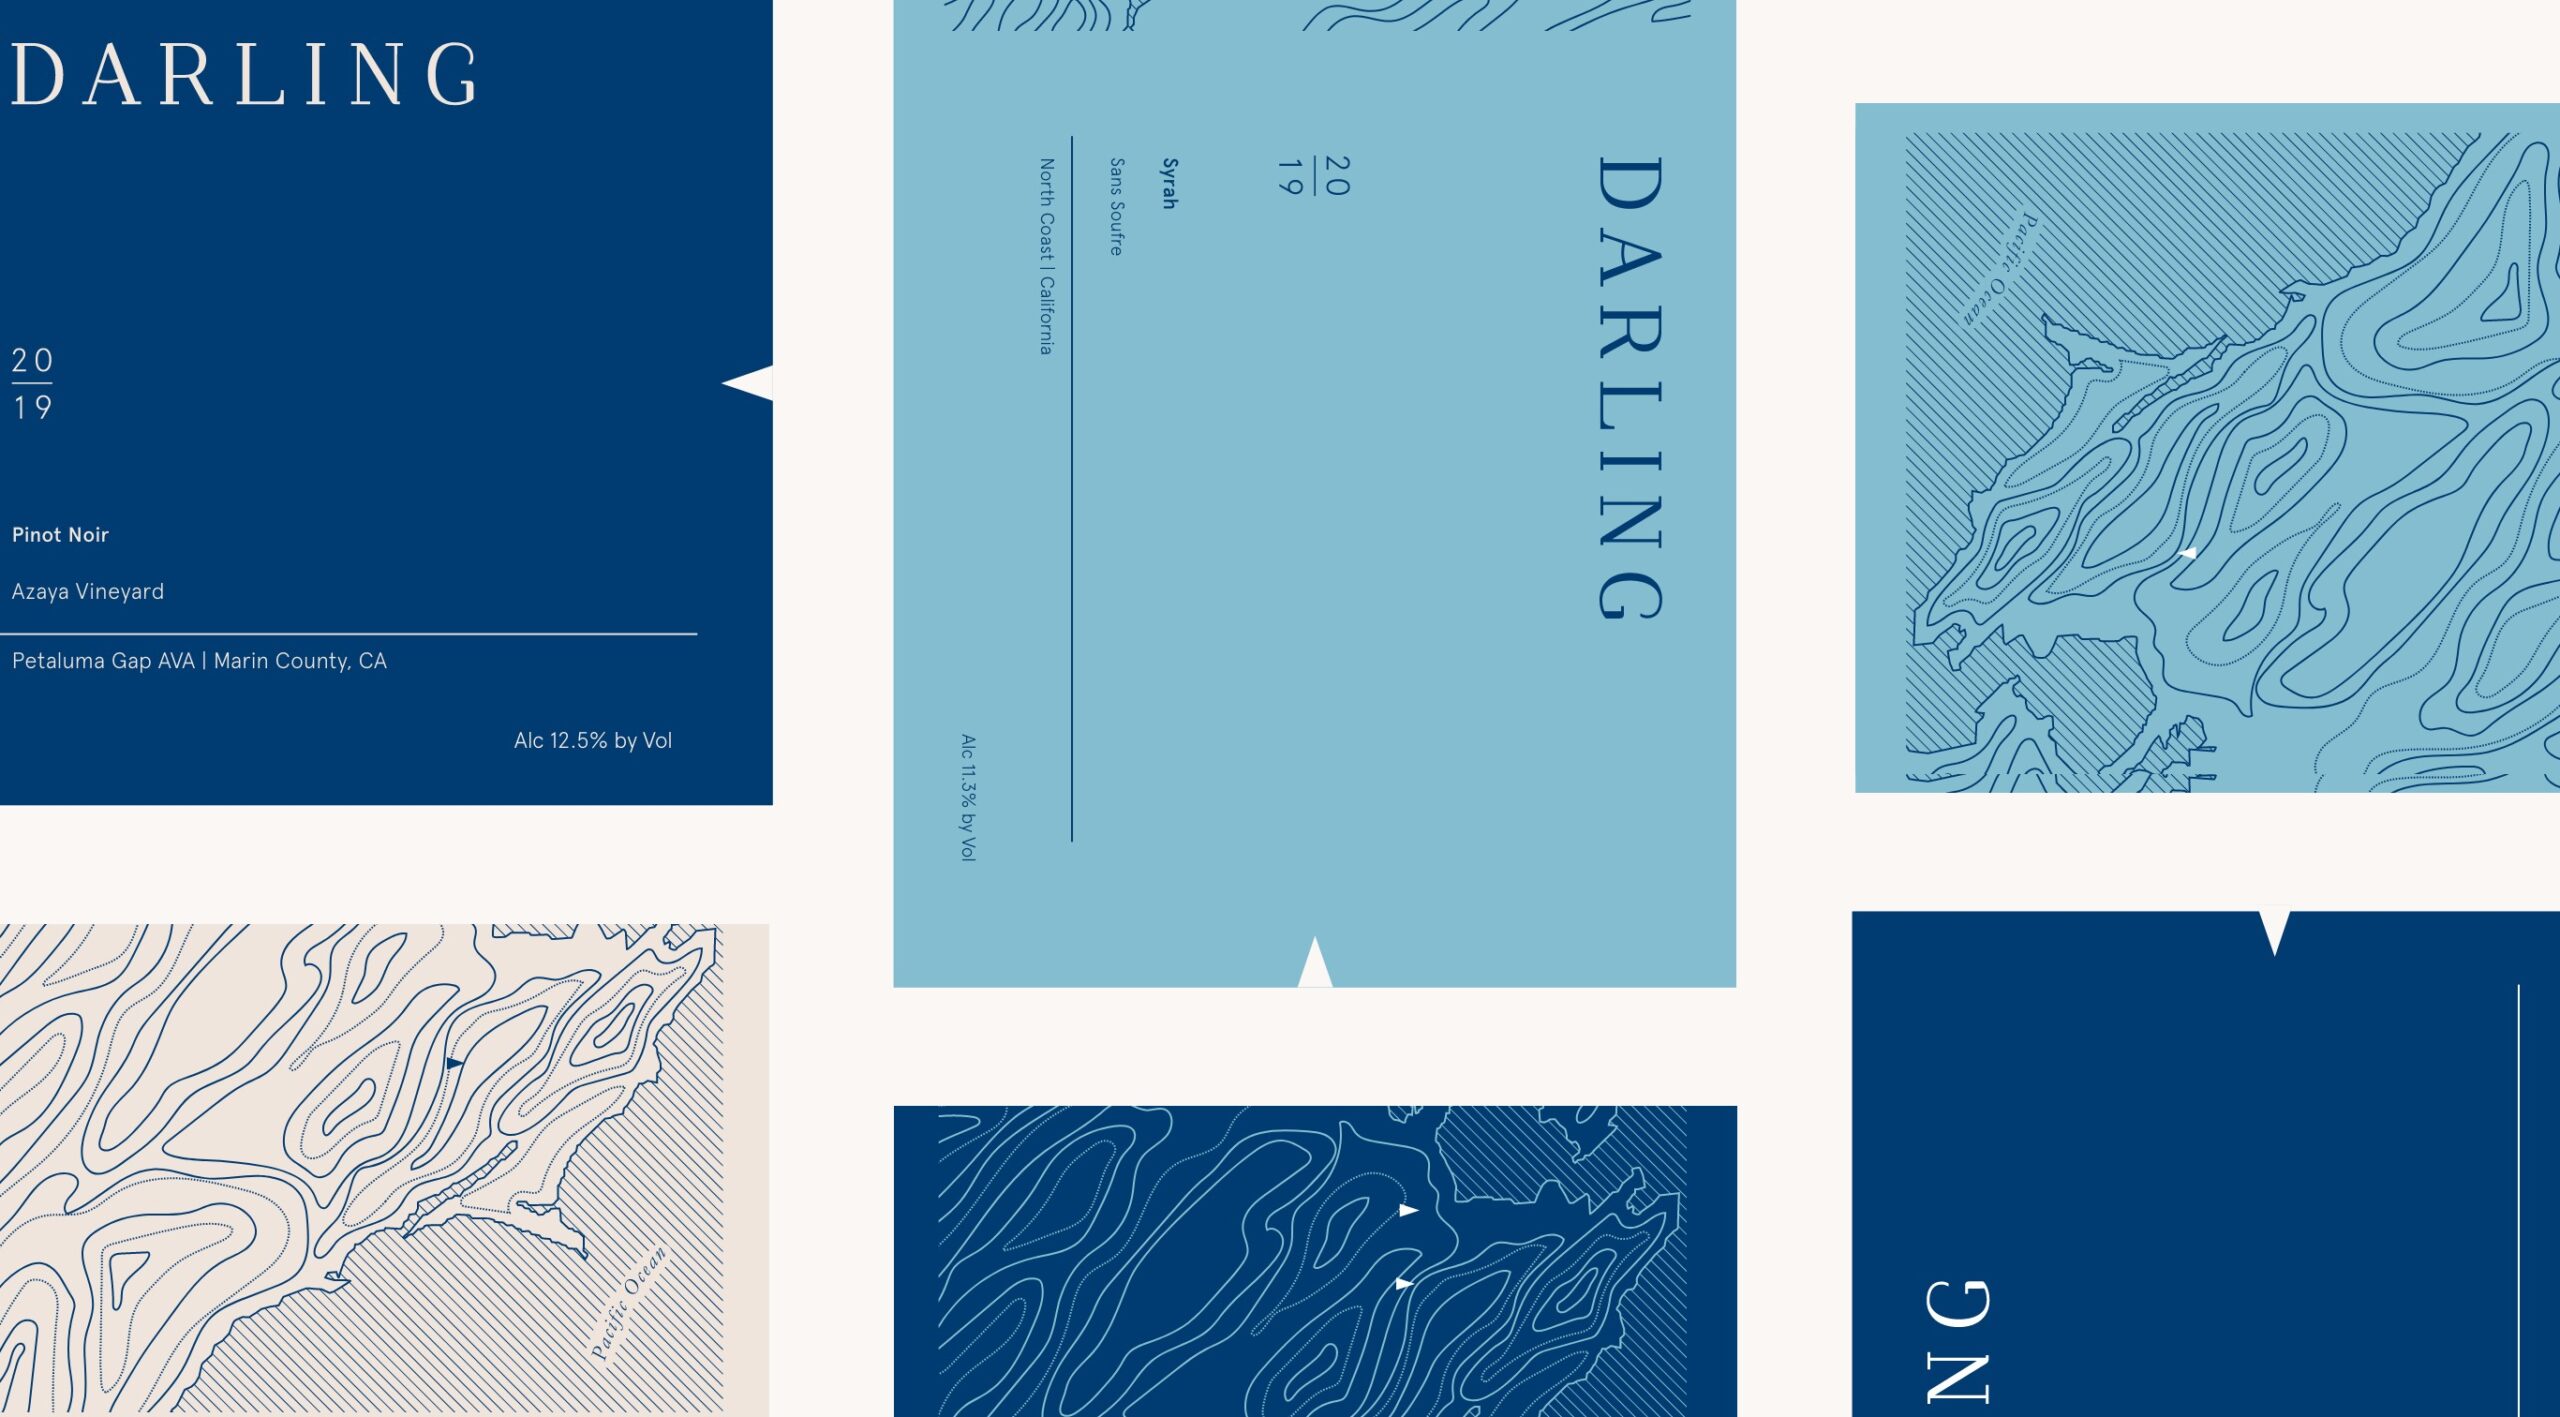 Grid of branded labels for Darling Wines packaging in deep blue, sea blue and cream